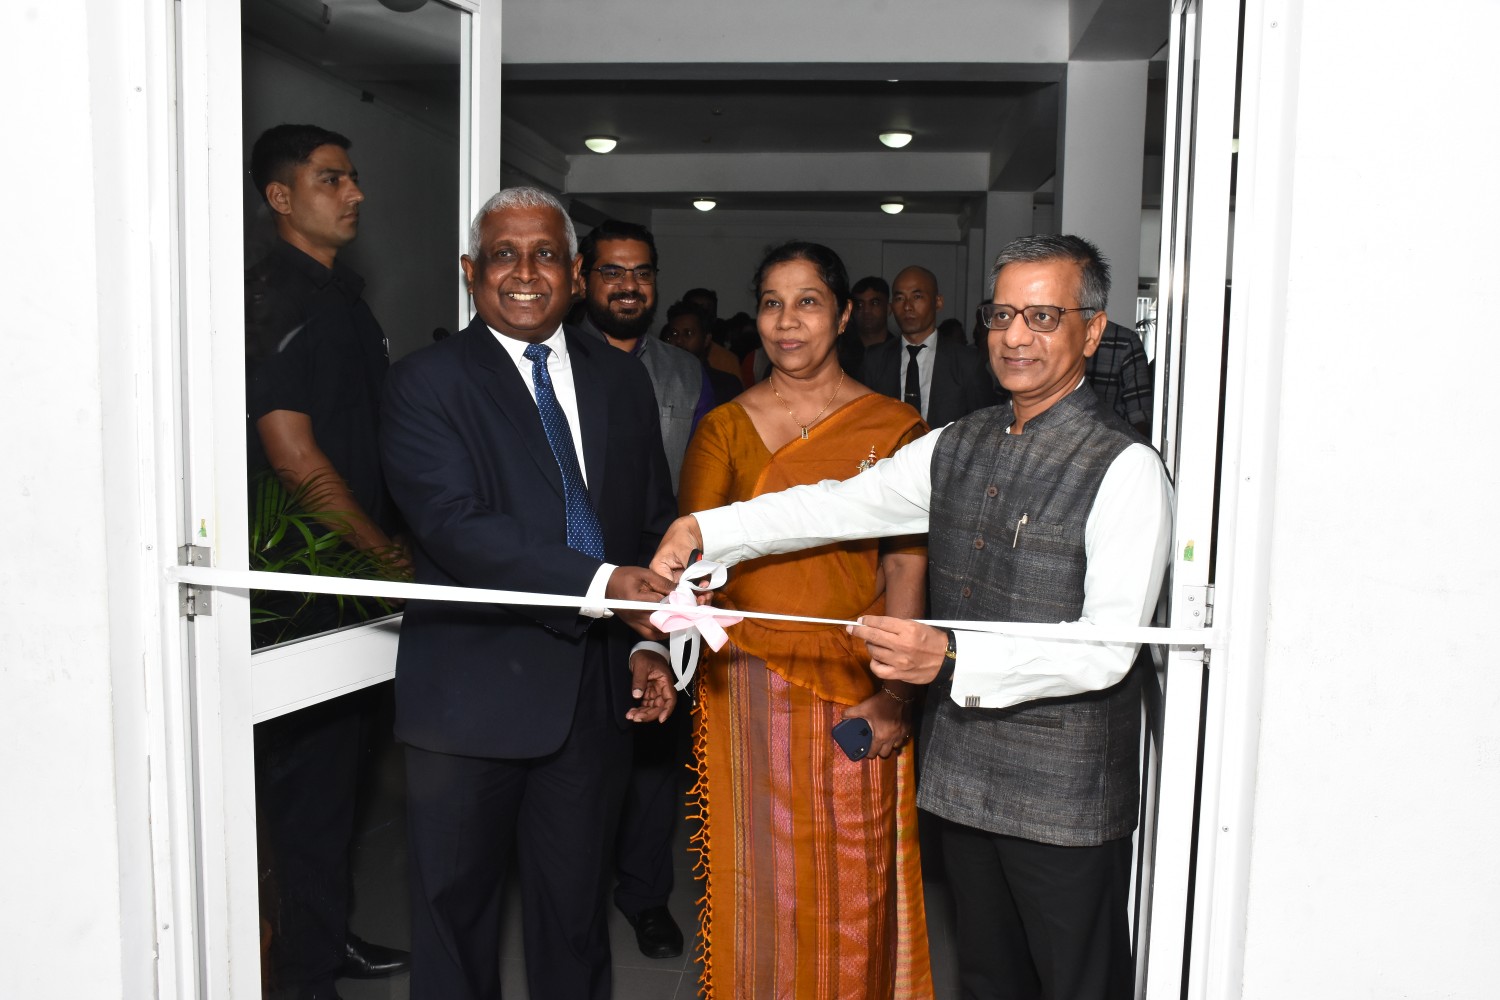 The first ever India-Alumni Art Exhibition – Chitralekha Inaugurated in Colombo